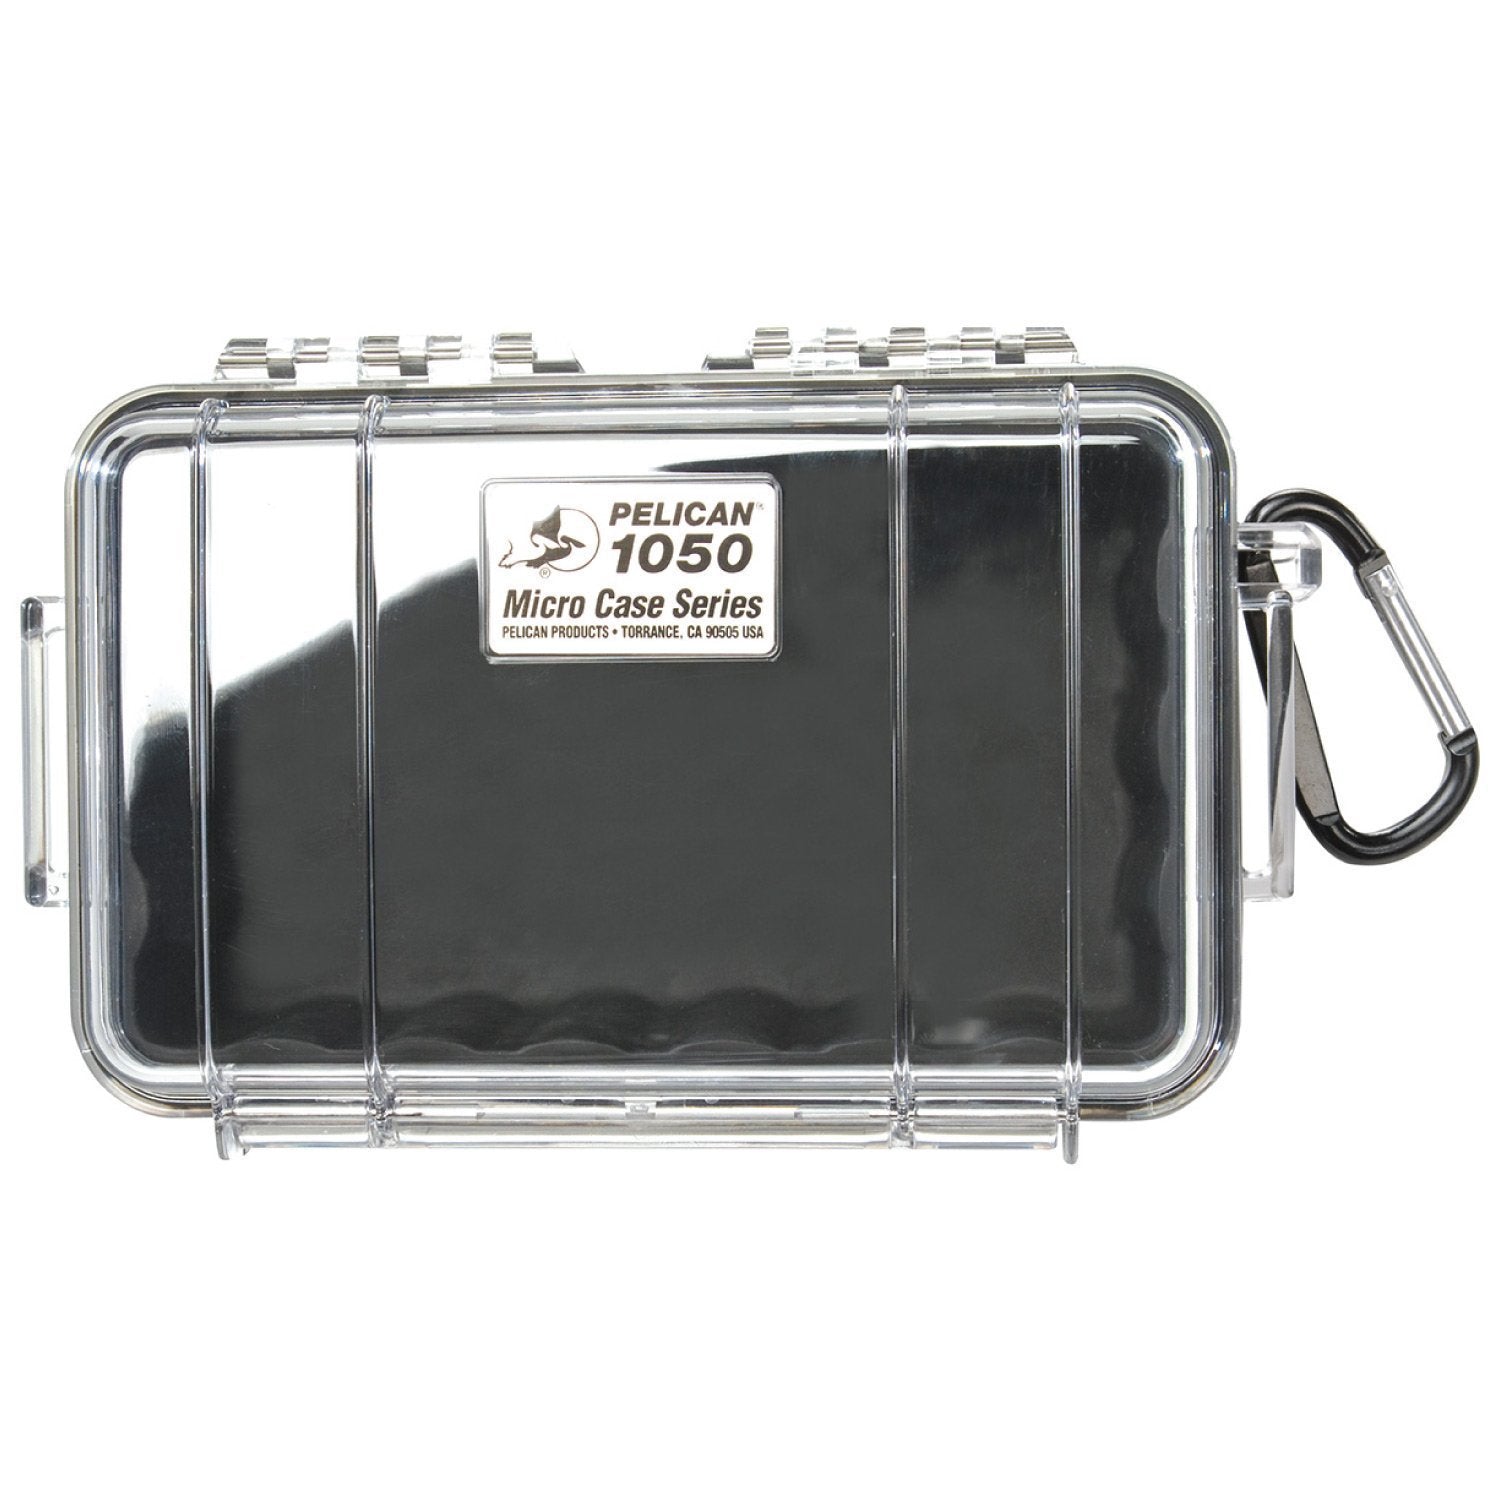 Pelican 1050 Micro Case Cases Pelican Products Clear Shell with Black Liner Tactical Gear Supplier Tactical Distributors Australia